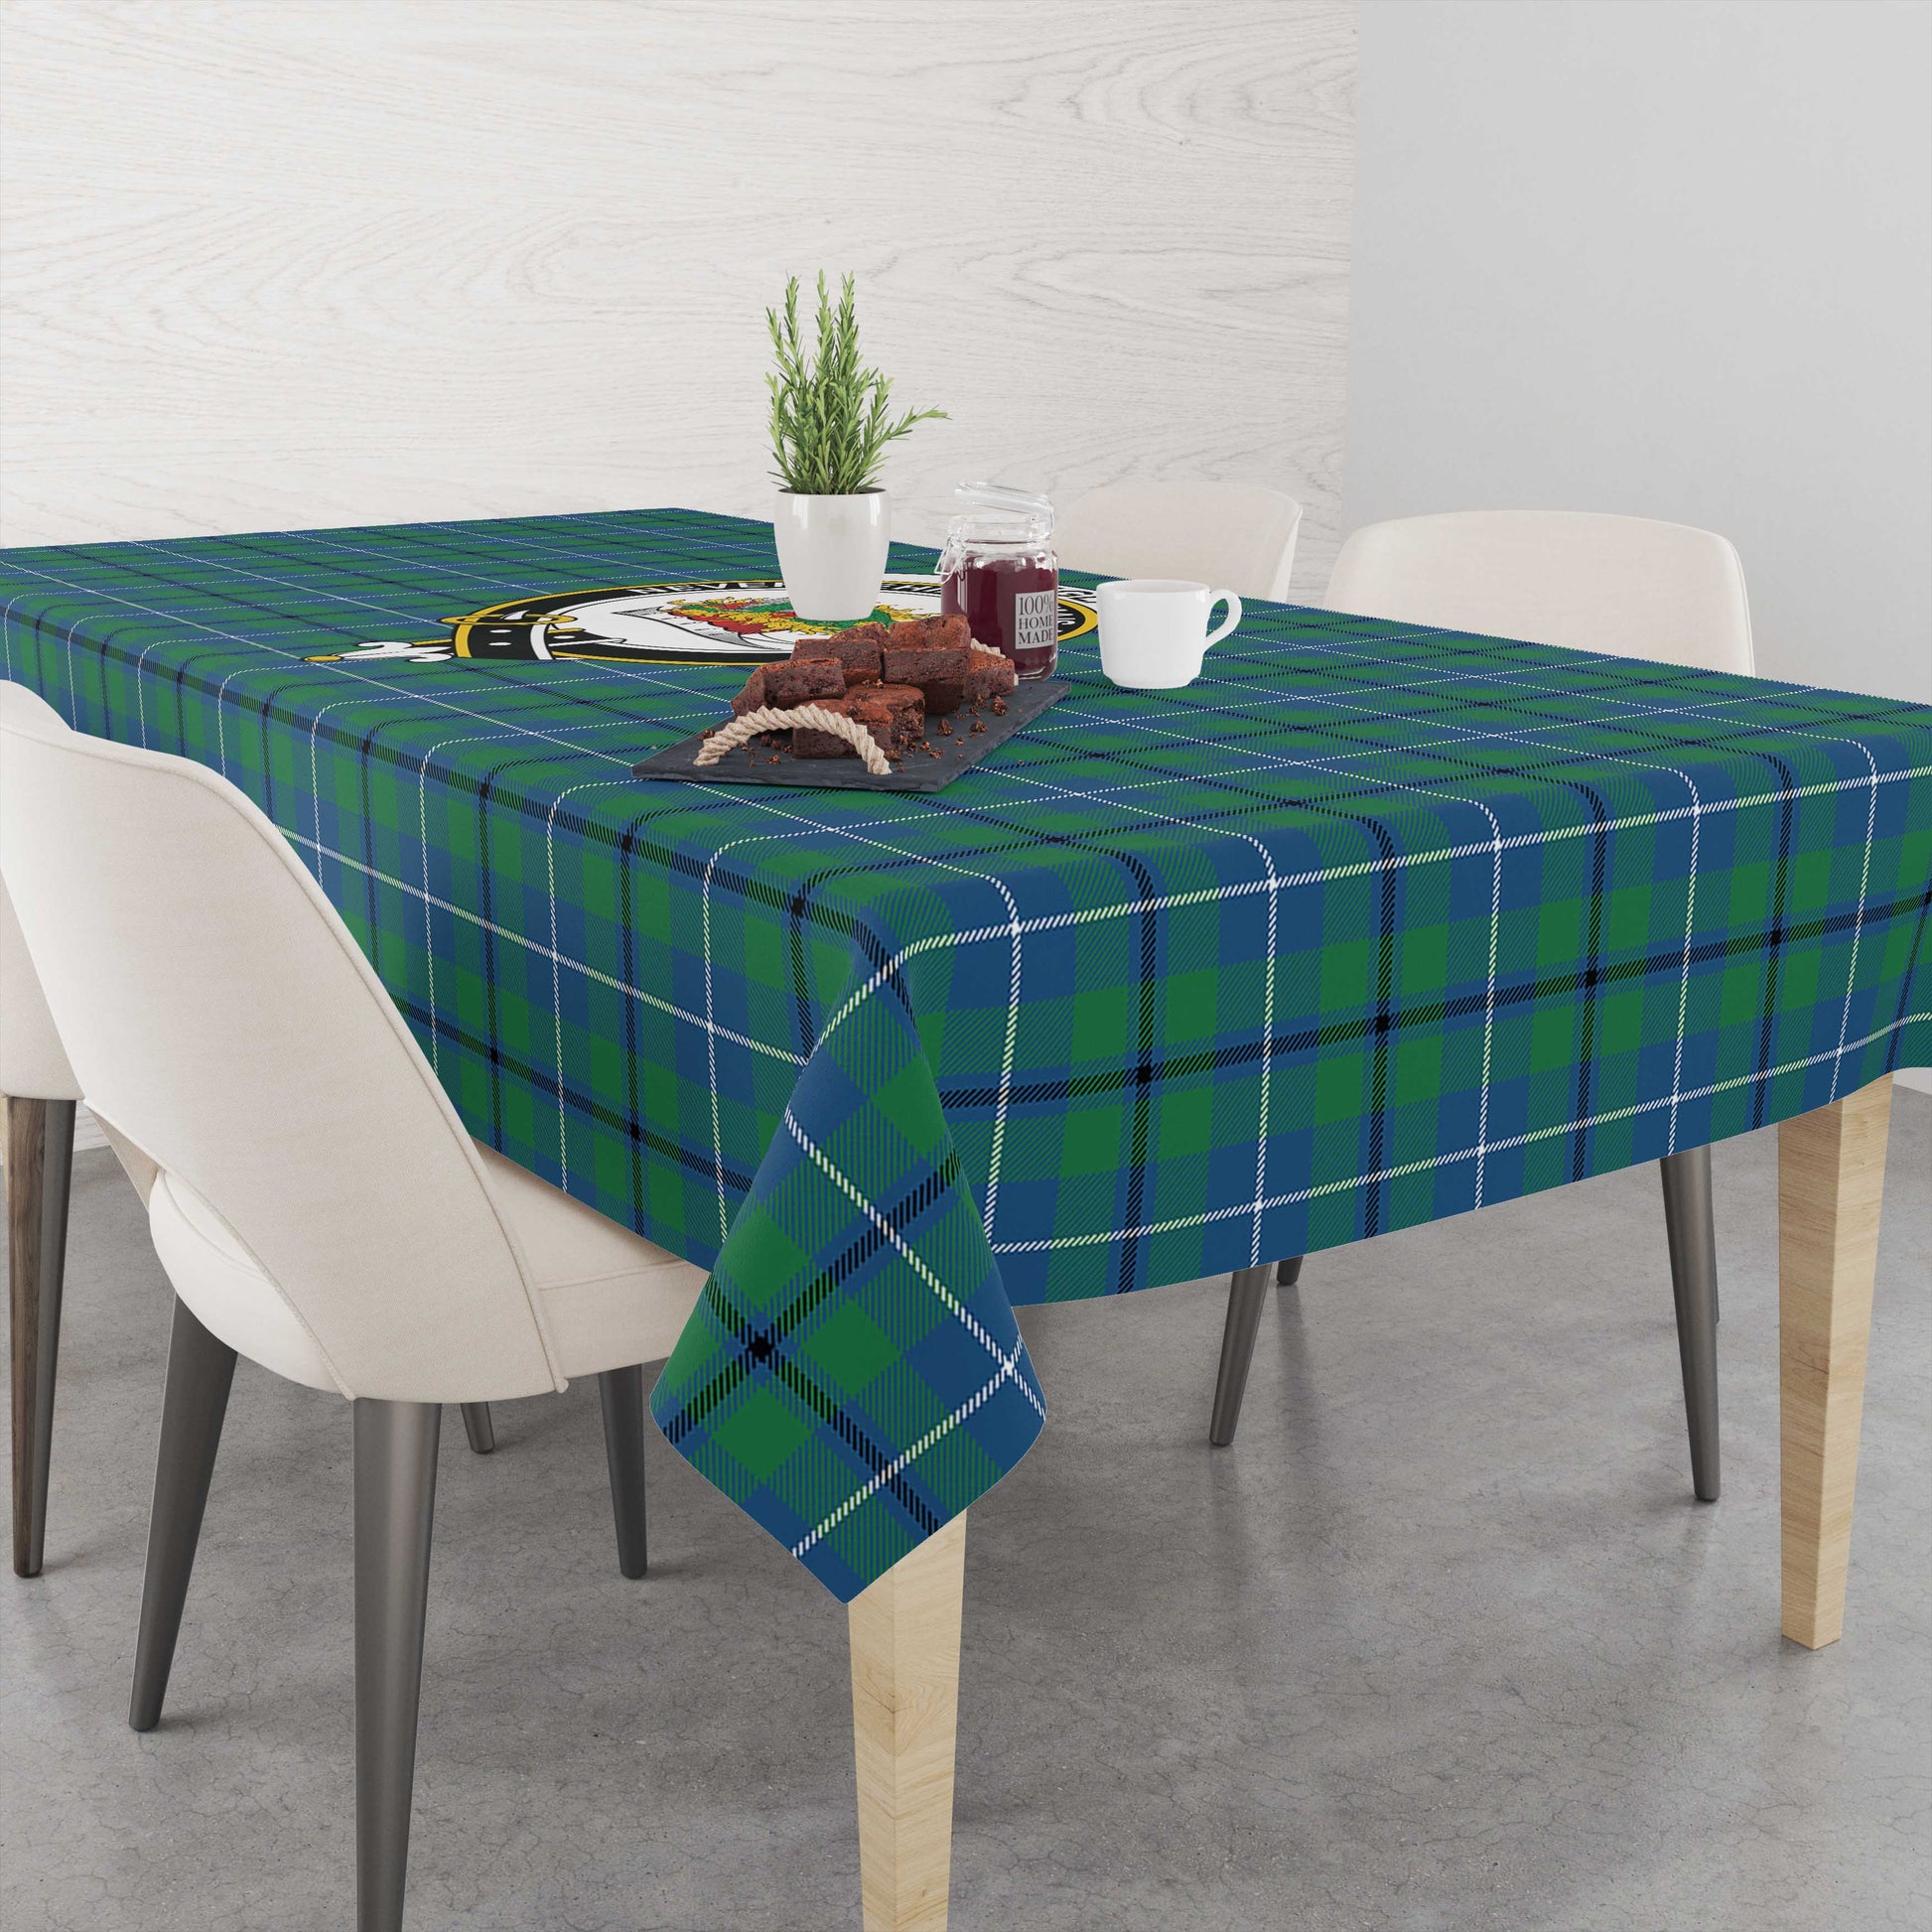 douglas-ancient-tatan-tablecloth-with-family-crest